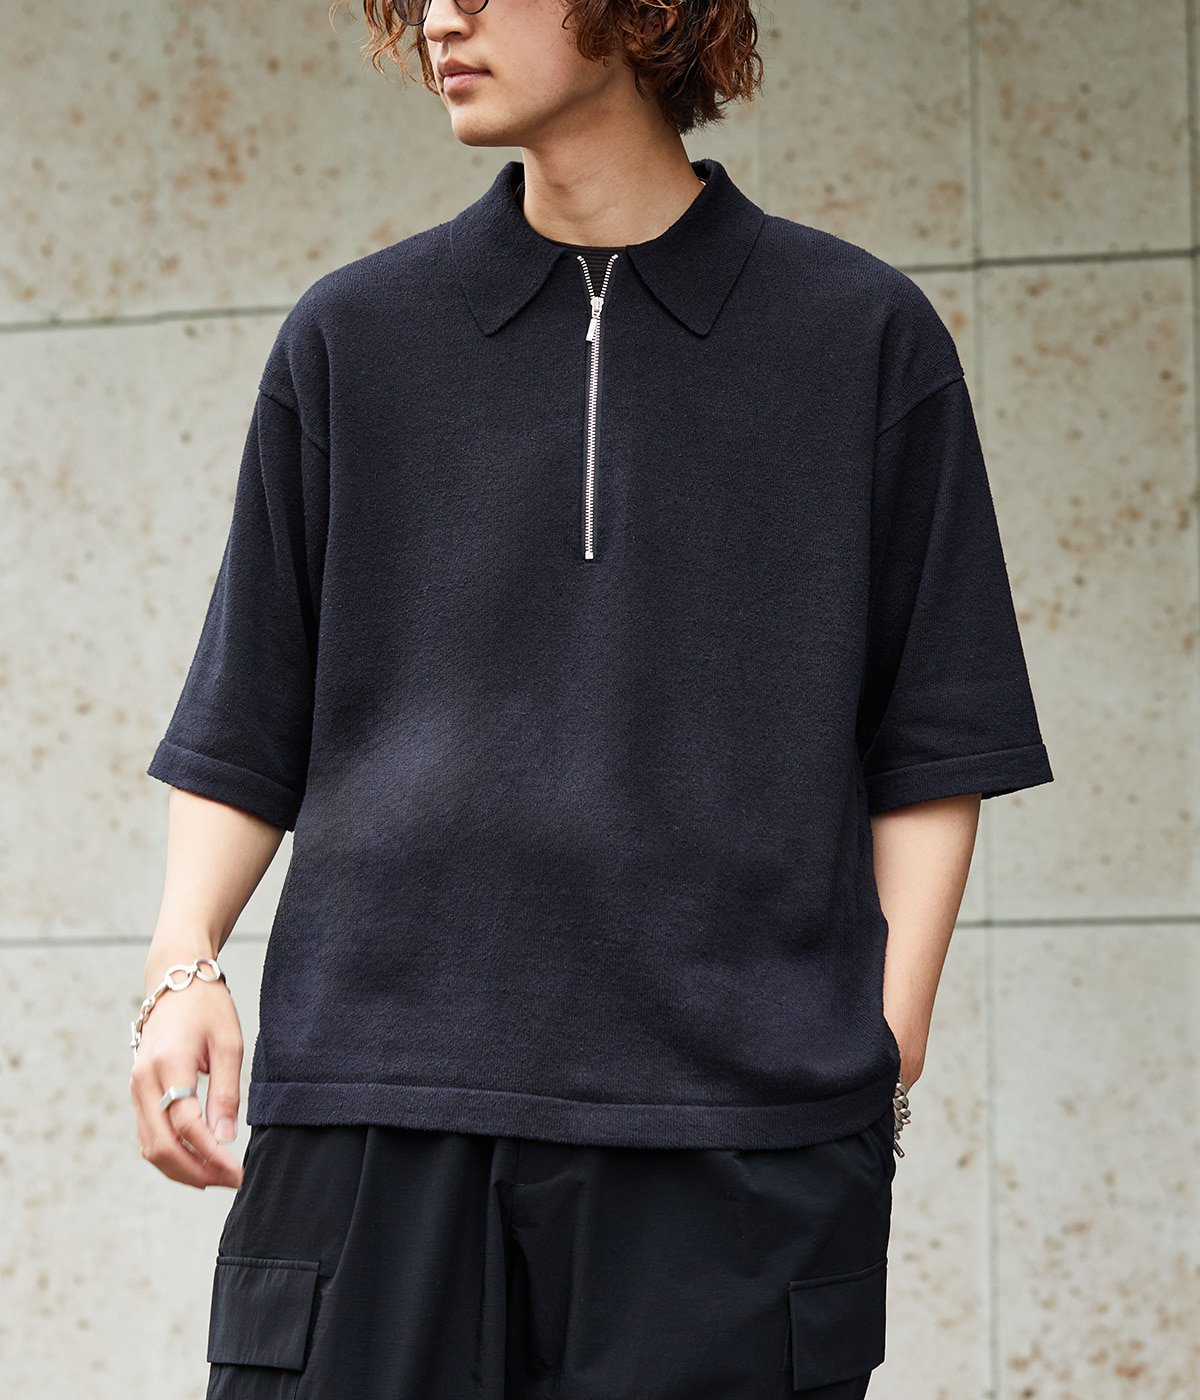 ONLY ARK】別注 Zip Knit Polo S/S | crepuscule(クレプスキュール 